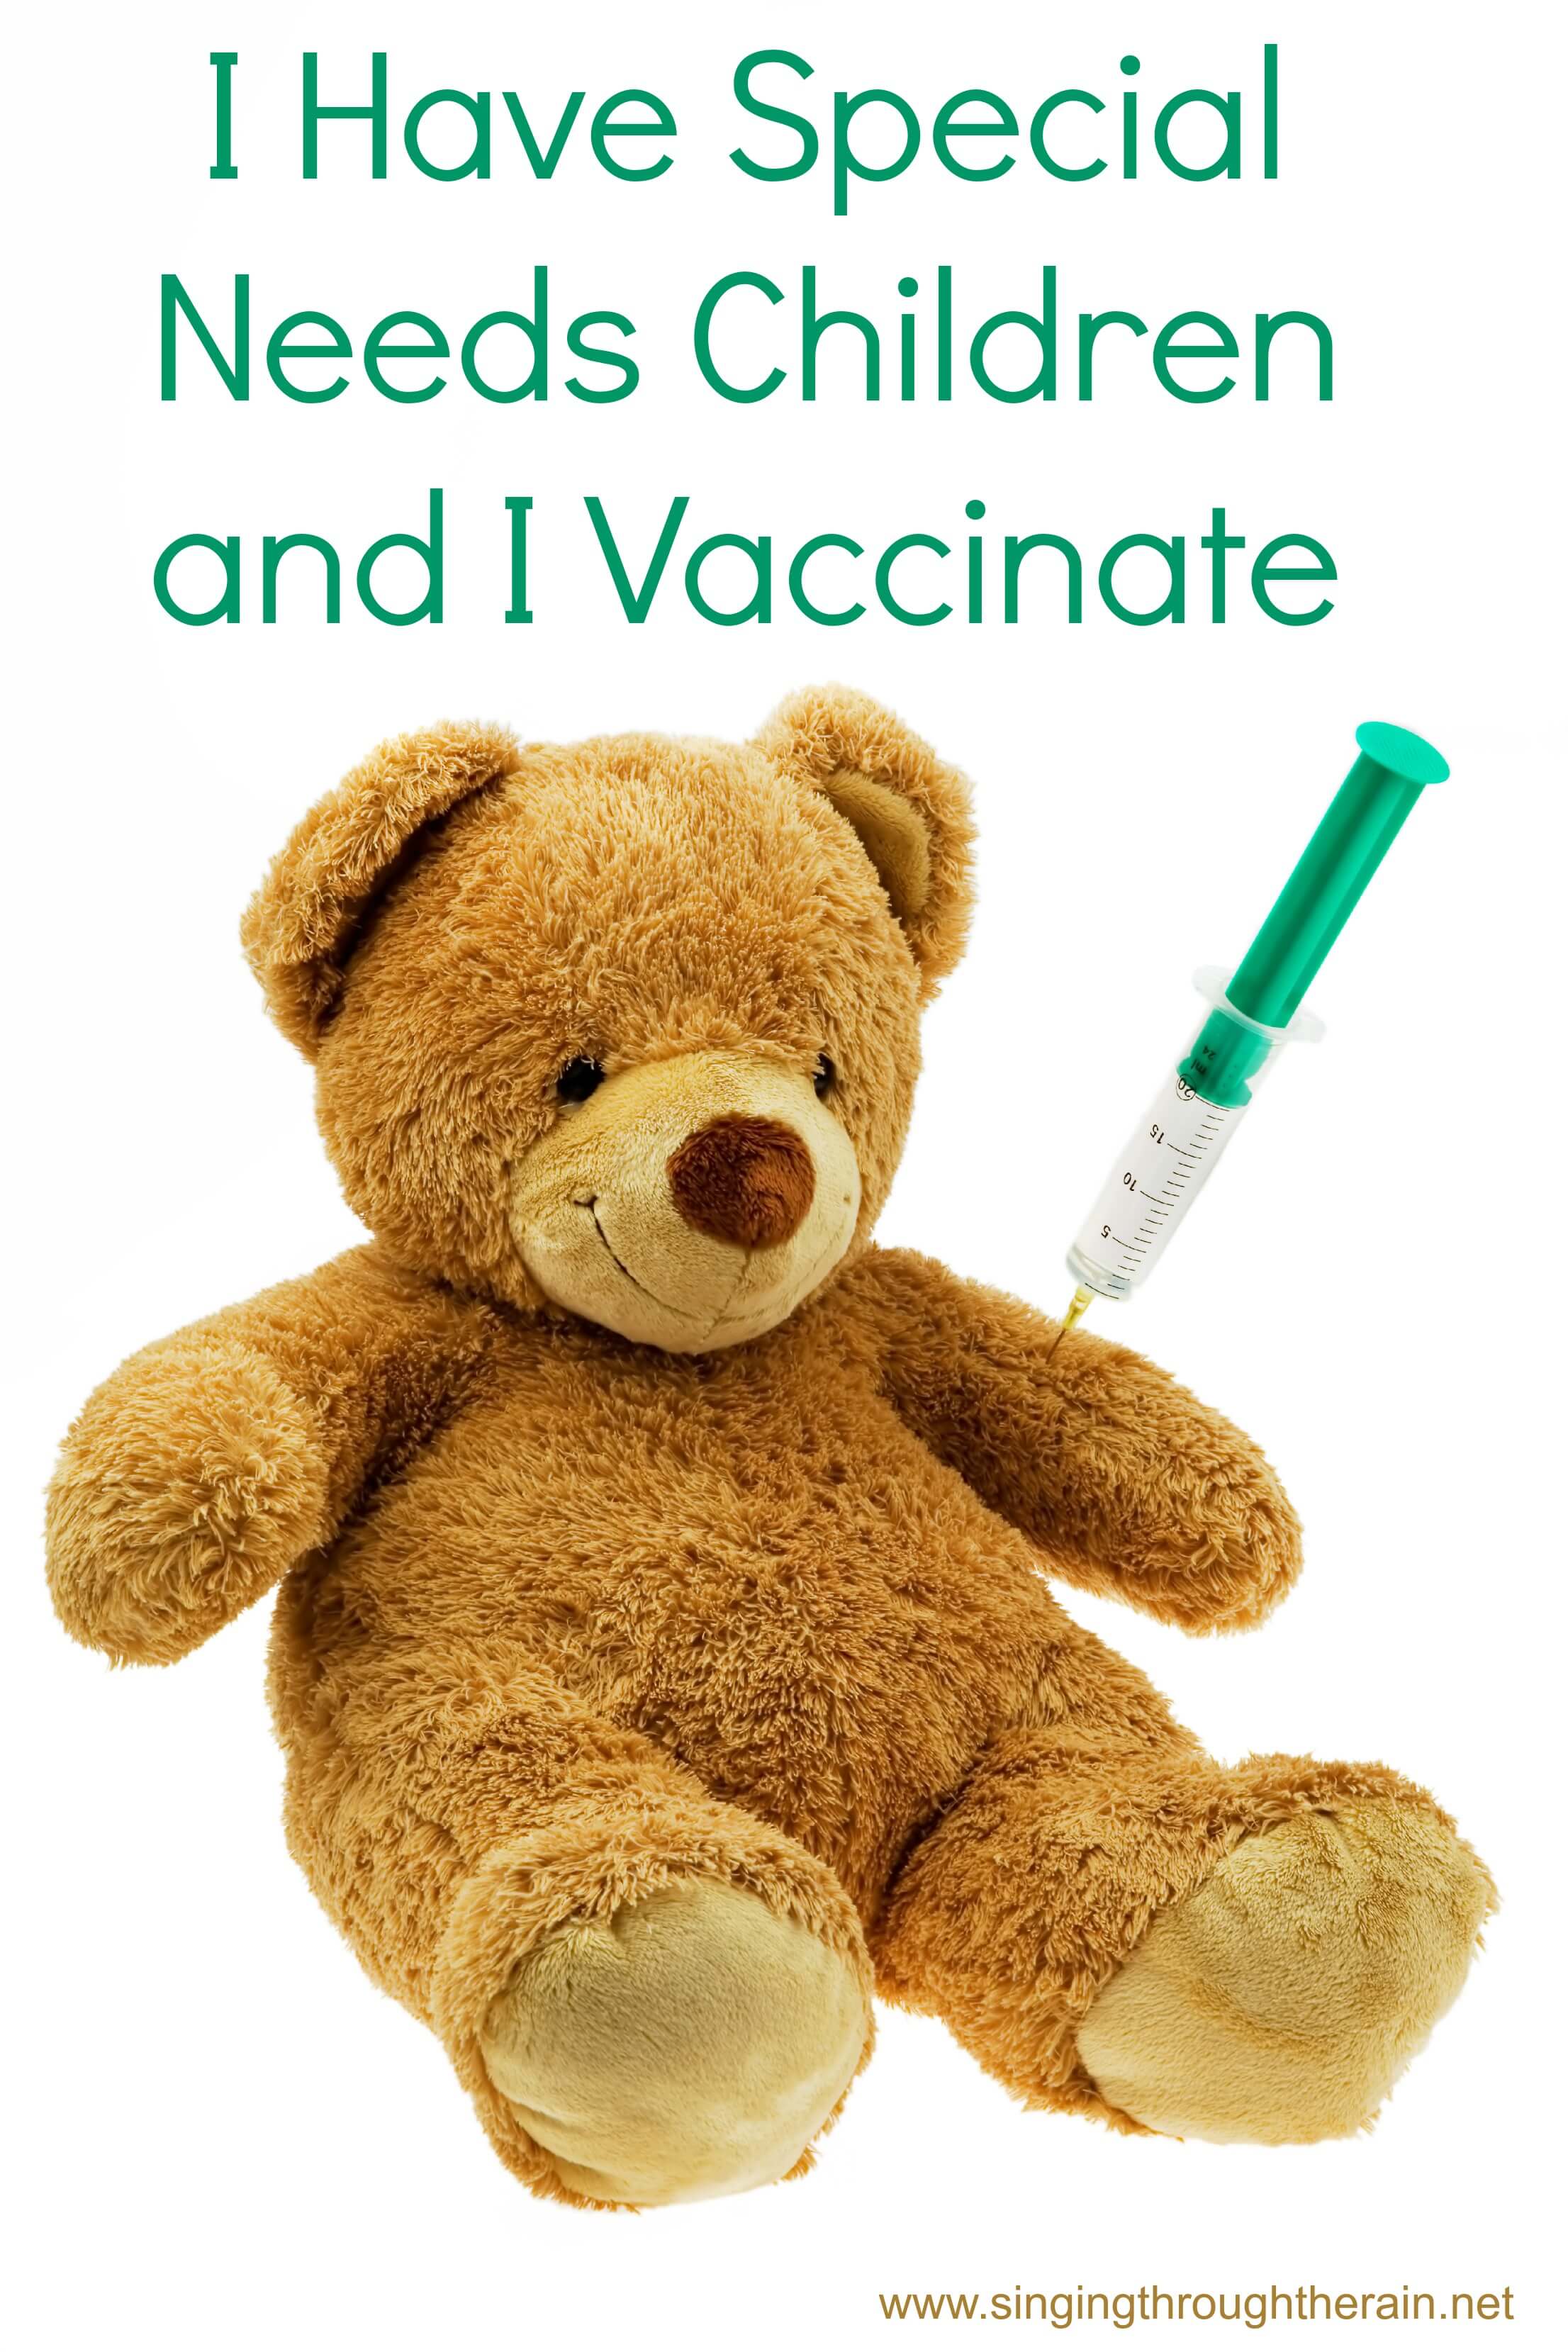 I Have Special Needs Children and I Vaccinate